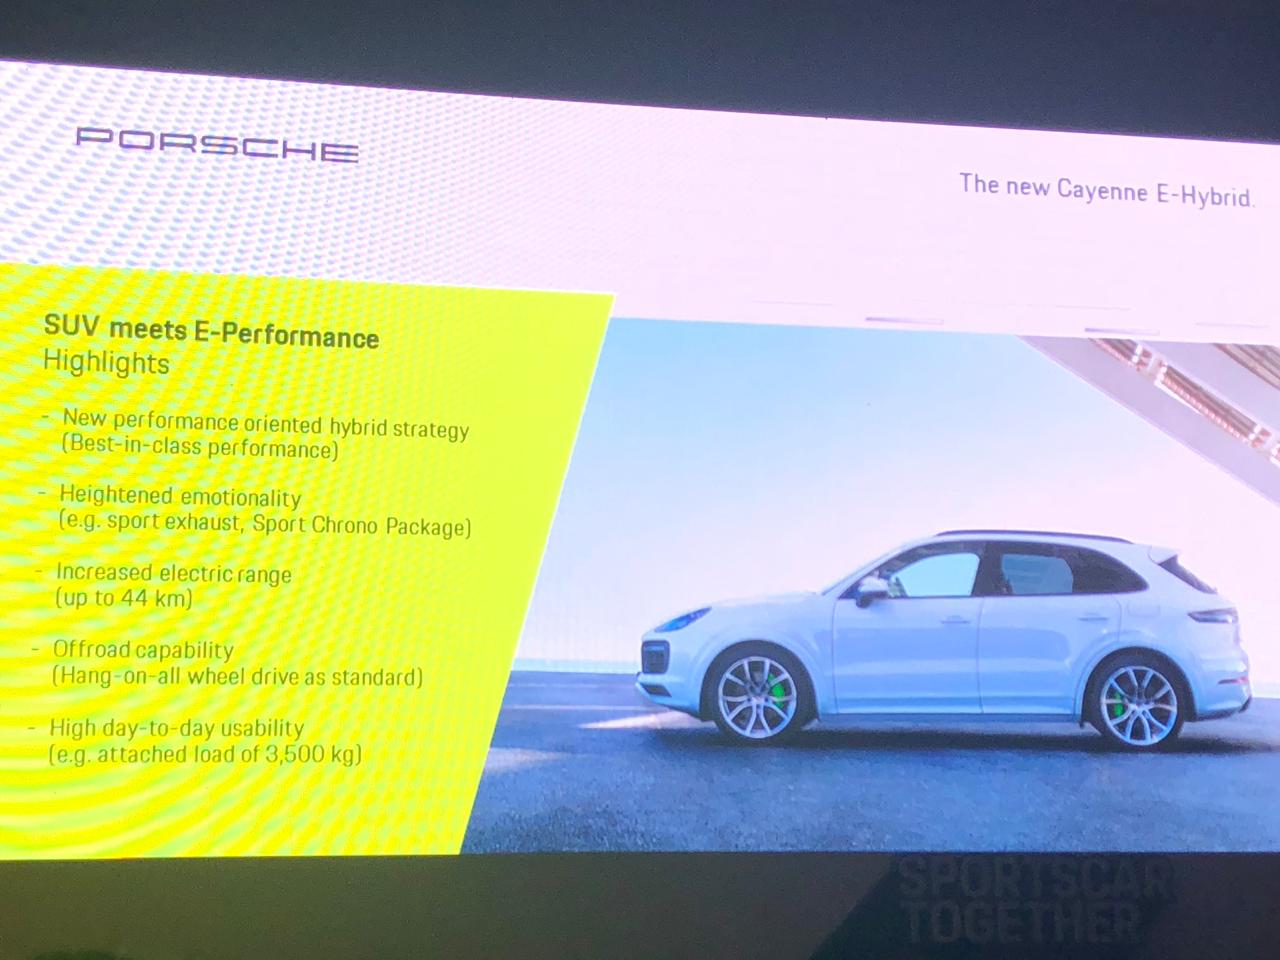 <p>Here are the details on features and specs of the Porsche Cayenne E-Hybrid</p>